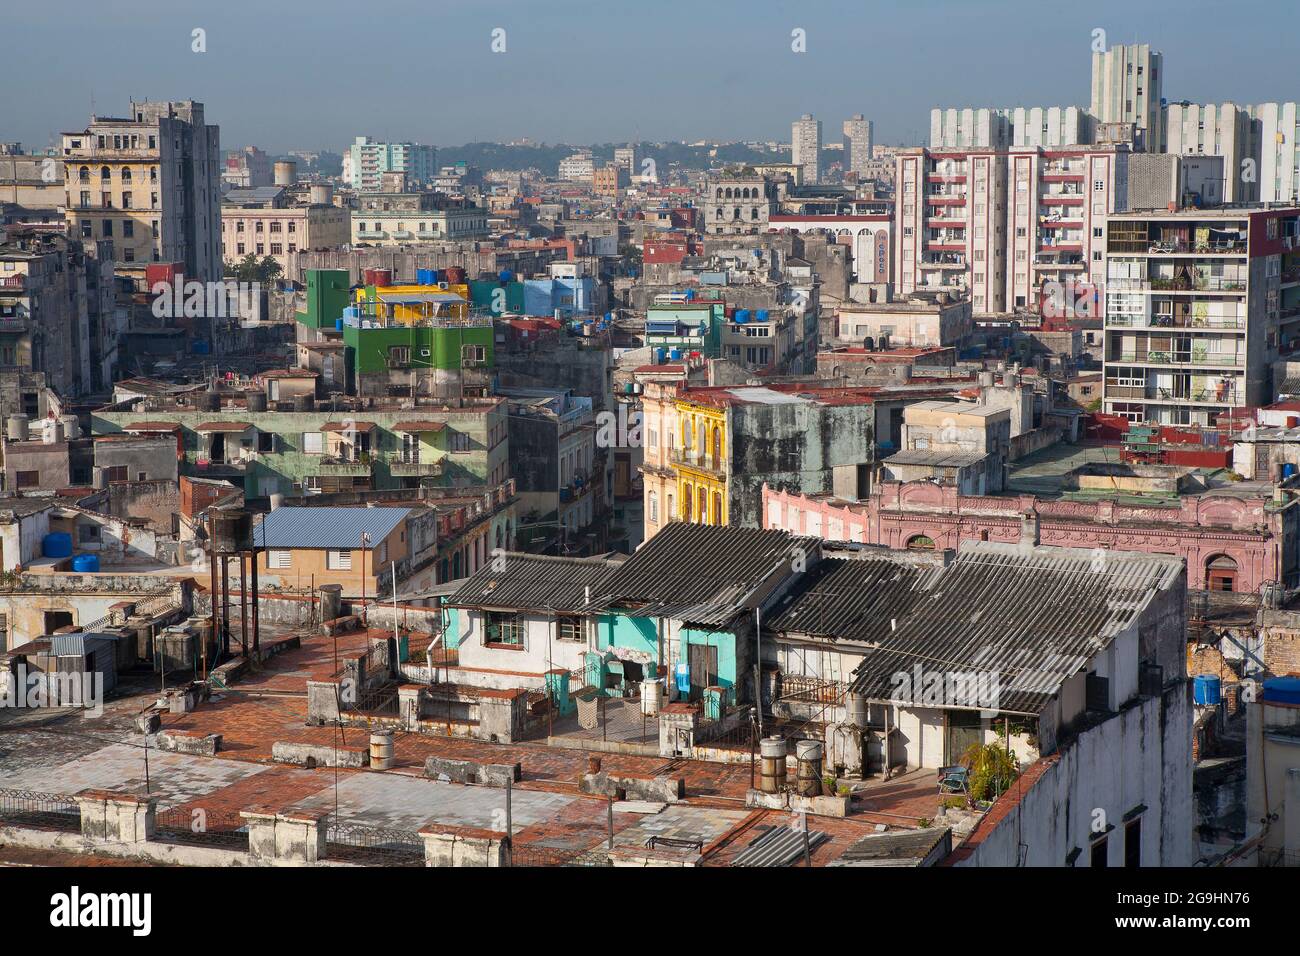 Sky line of Havana Cuba looking over the roof tops from central square Stock Photo